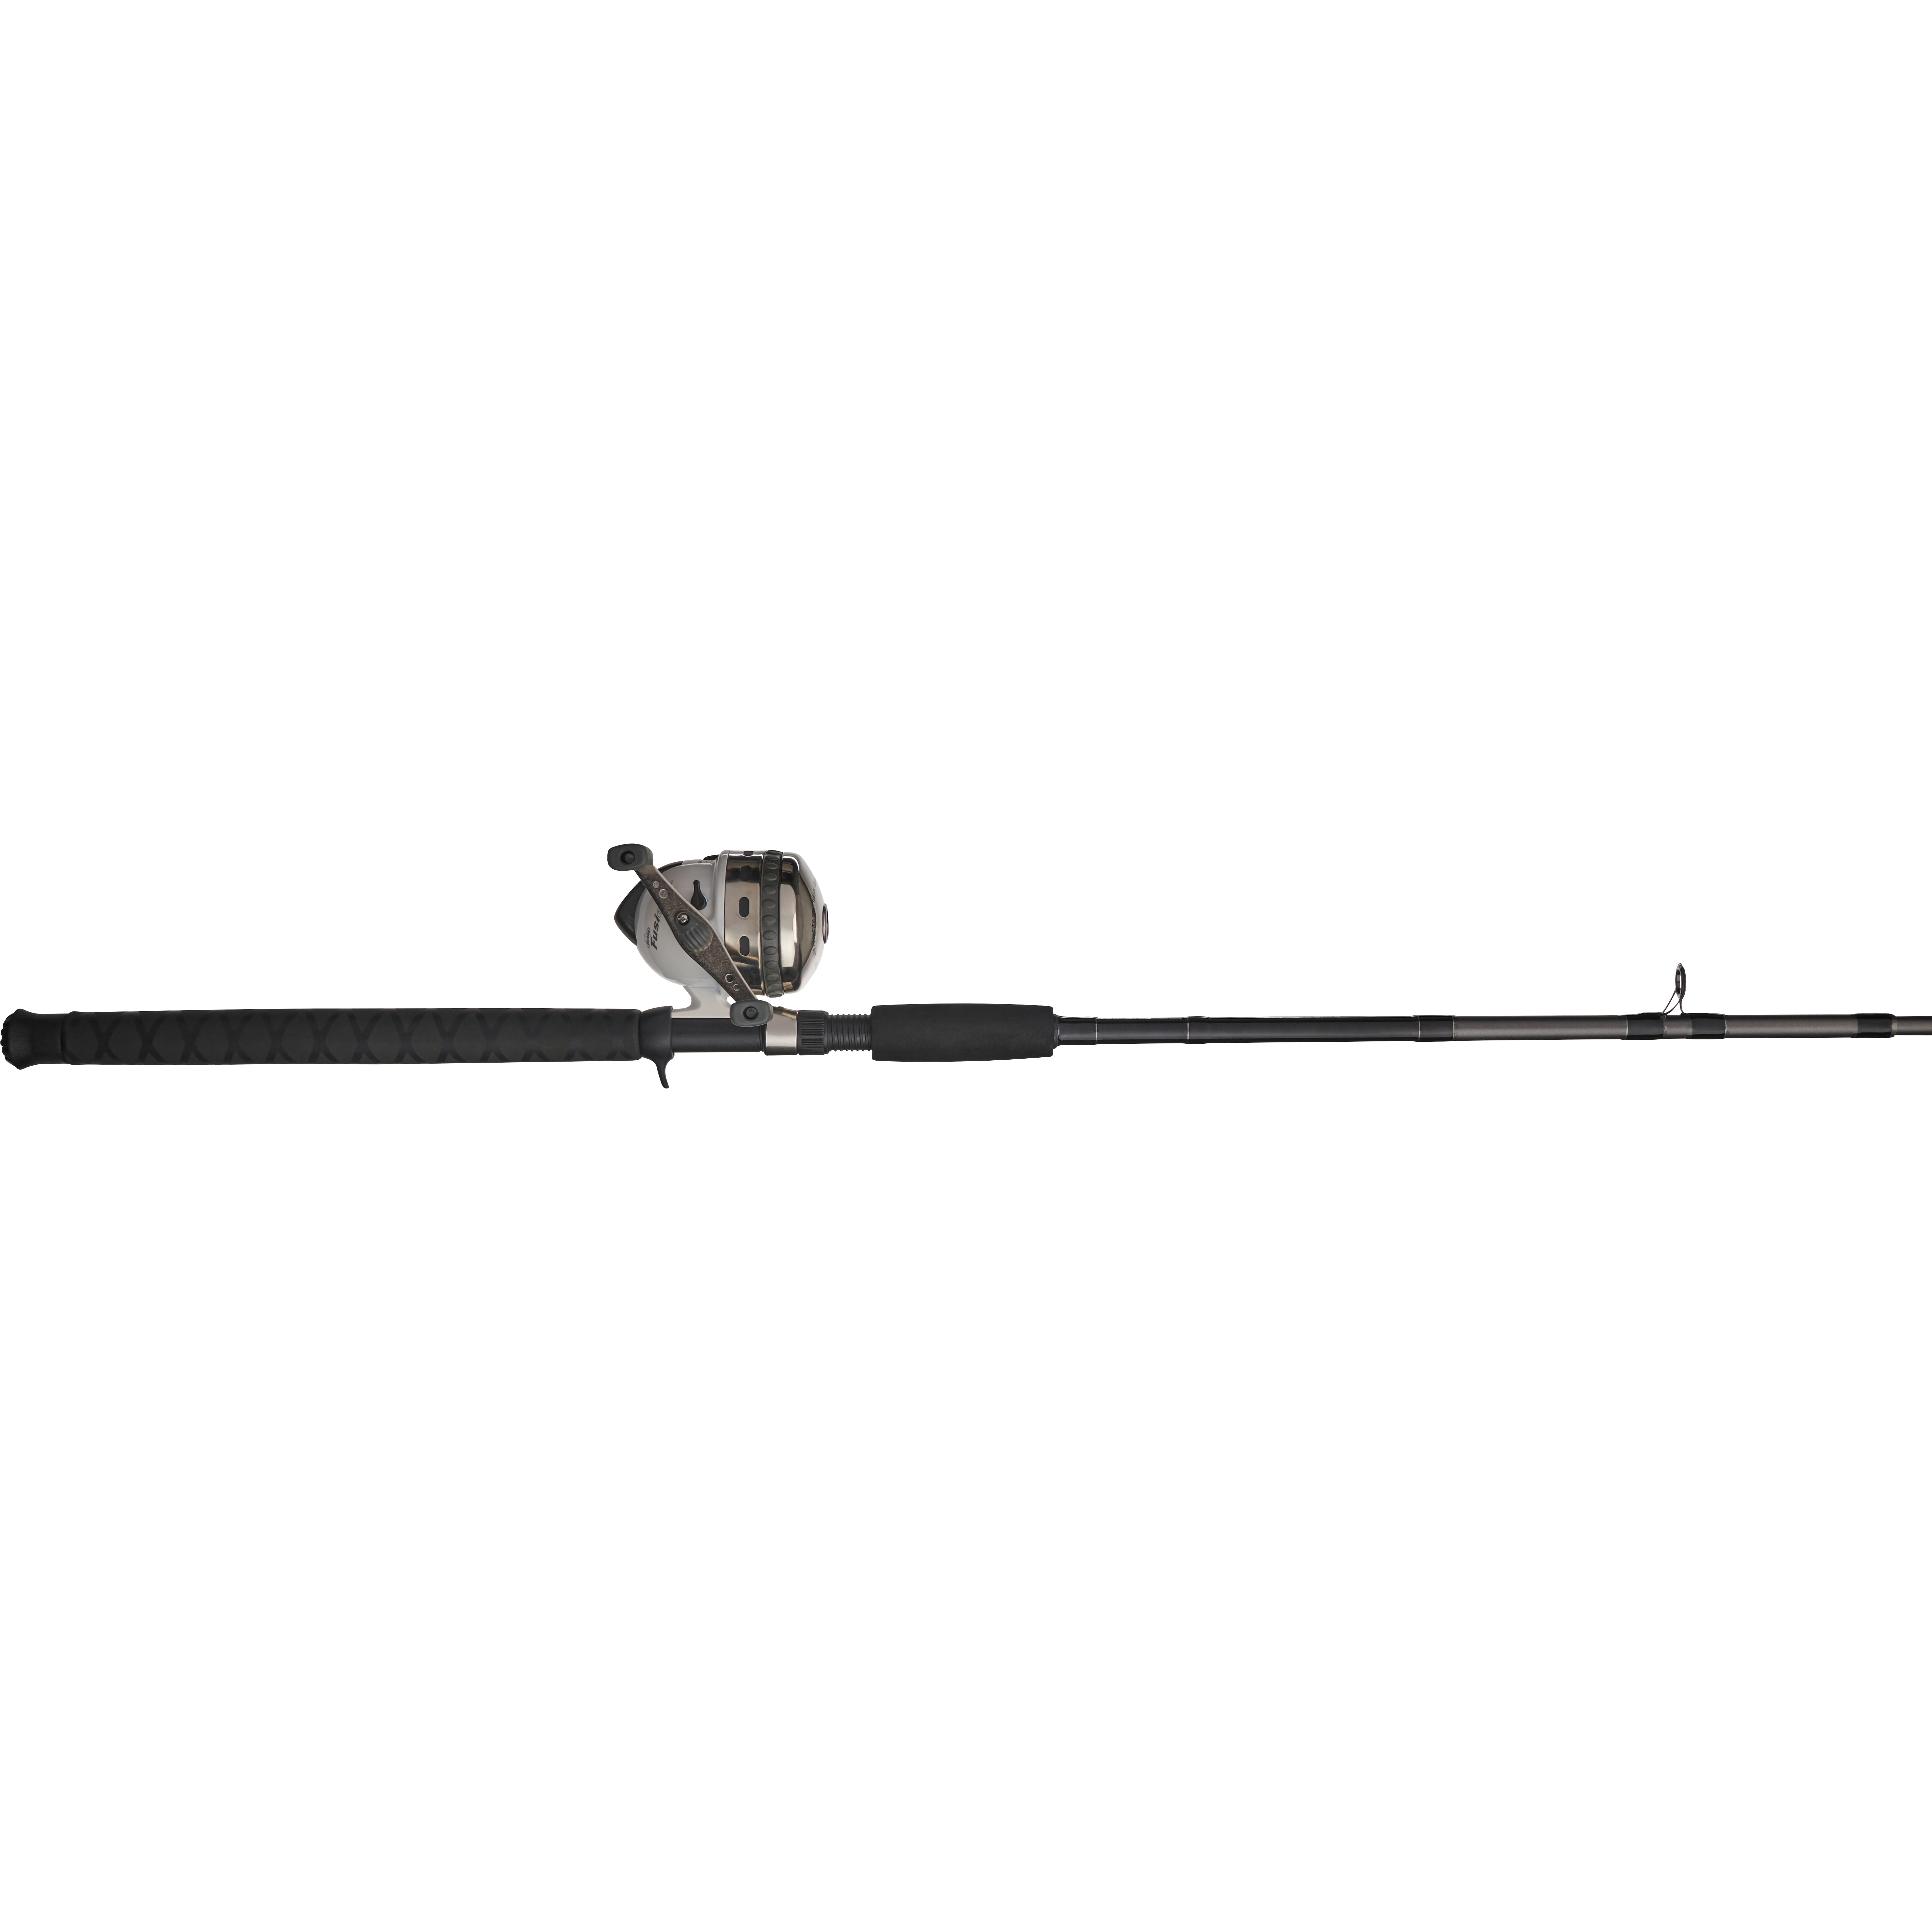 Redington Lightweight 4 Piece Classic Trout Angler Small Fly Fishing Rod,  Red 